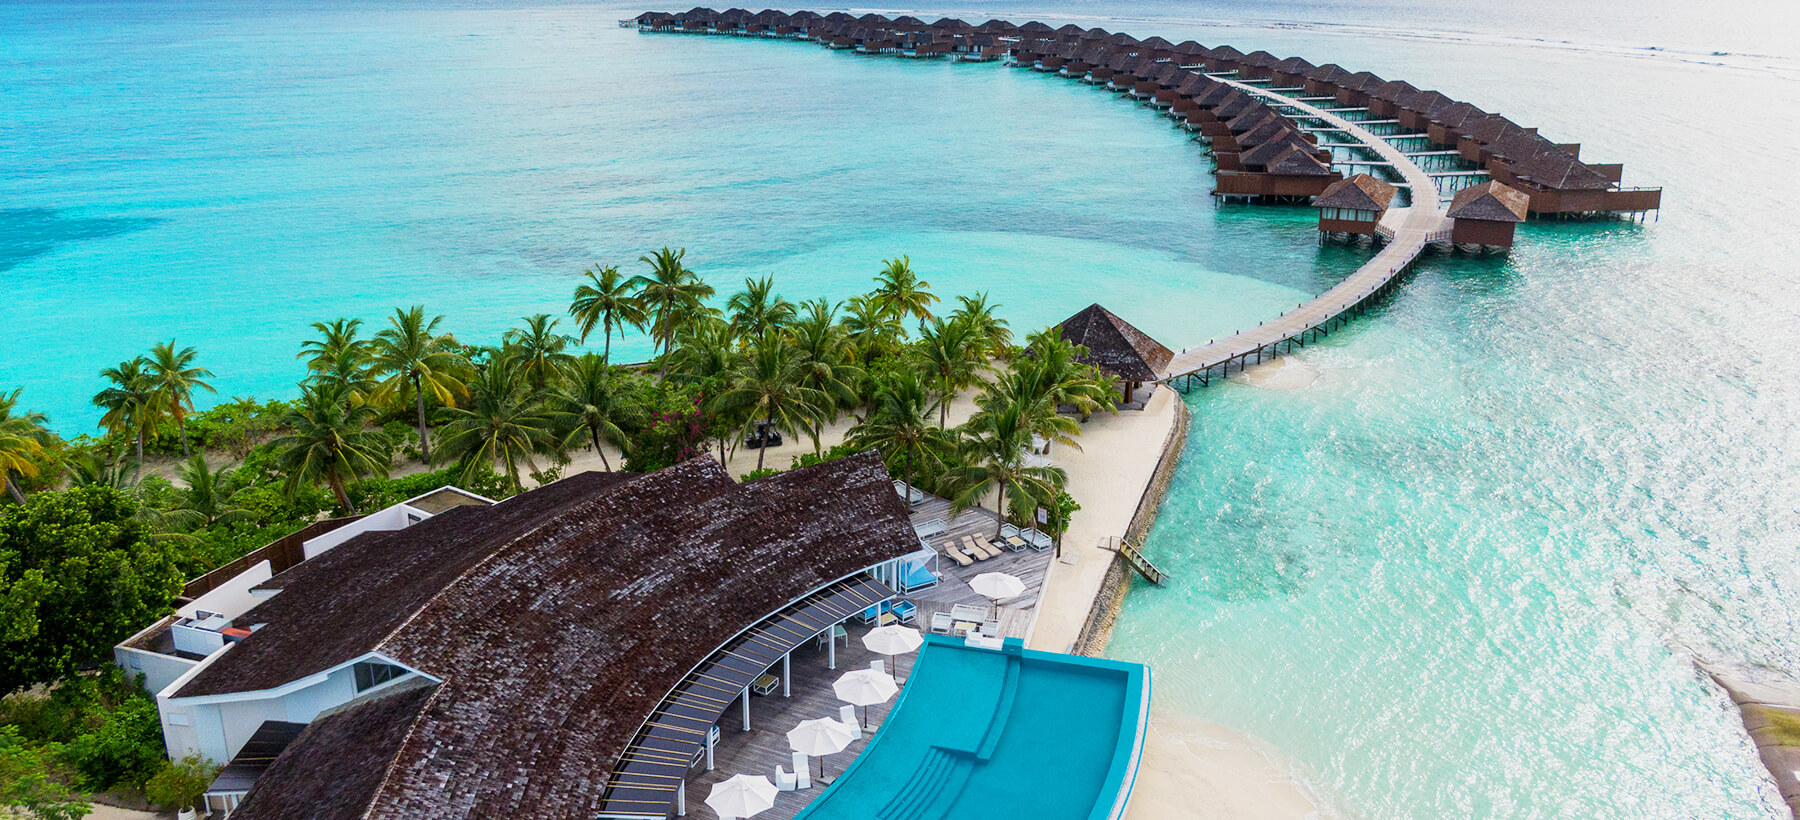 READ OUR EDITOR'S LATEST REVIEW OF THE STUNNING HIDEAWAYS BEACH RESORT AND SPA IN THE MALDIVES, 100% PERFECTION